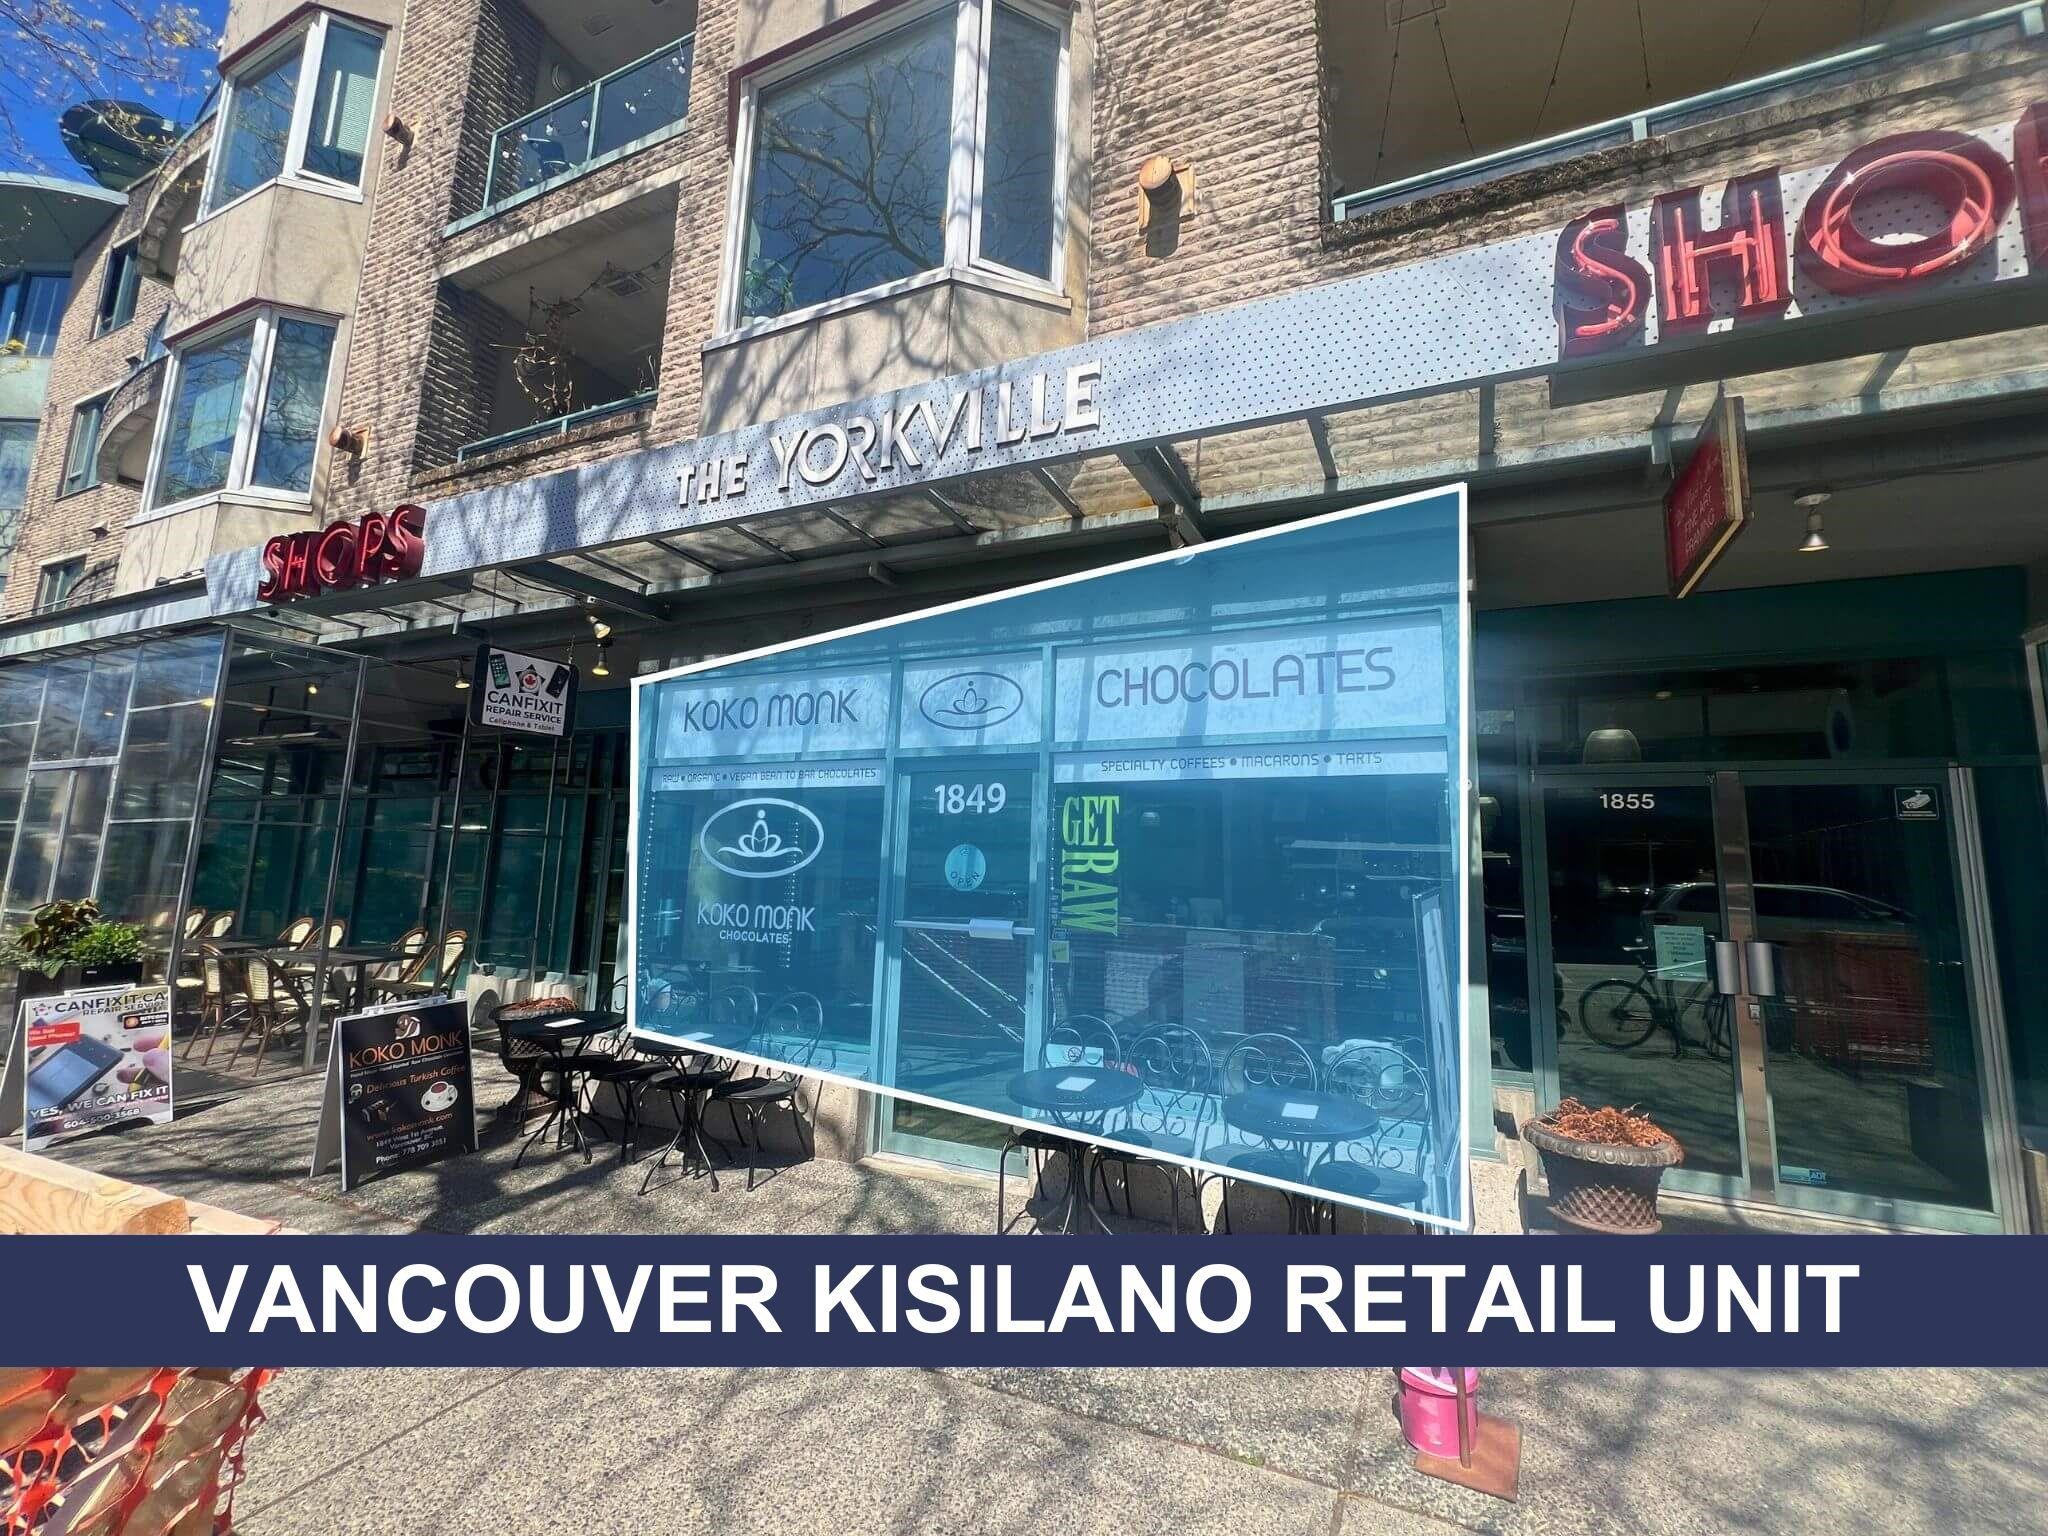 Kitsilano Land Commercial for sale:    (Listed 6800-05-13)